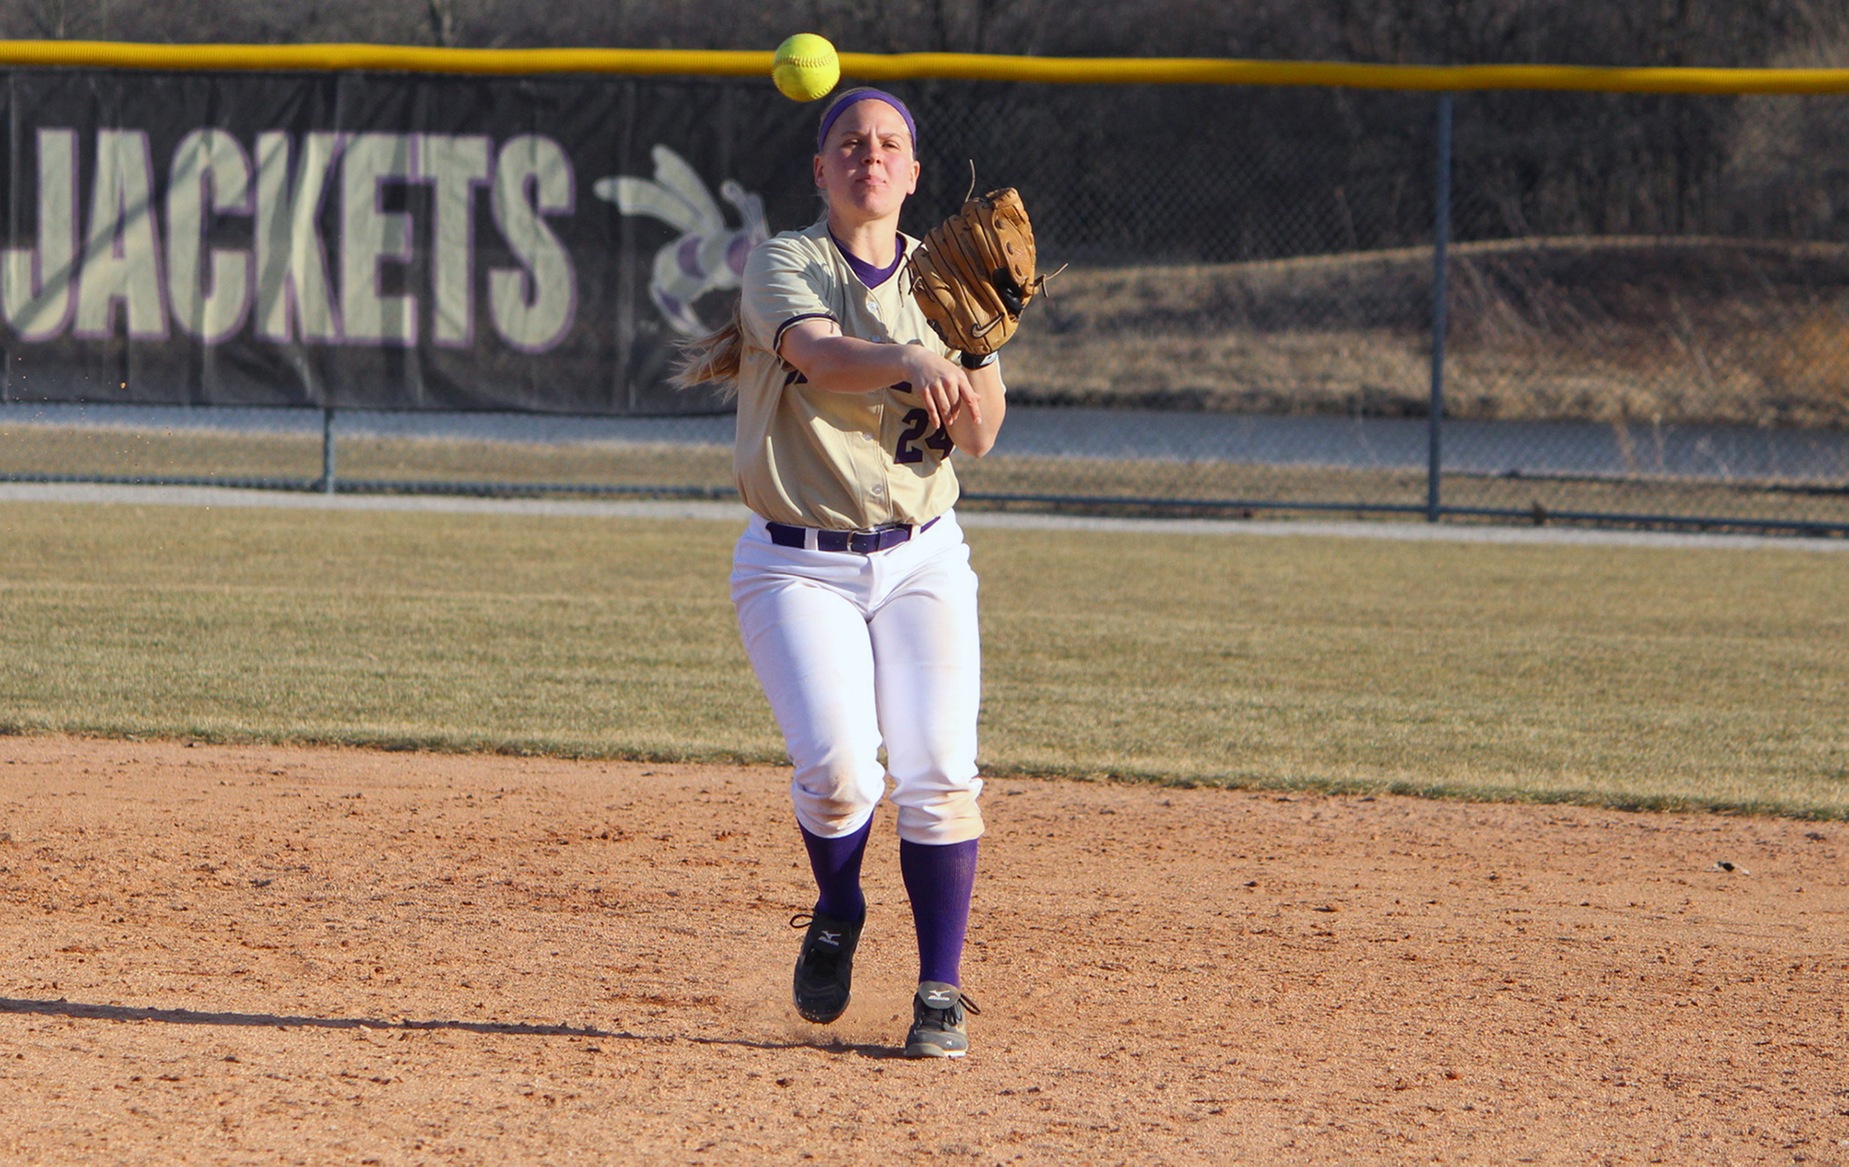 Yellow Jackets fall to Franklin in HCAC doubleheader Saturday